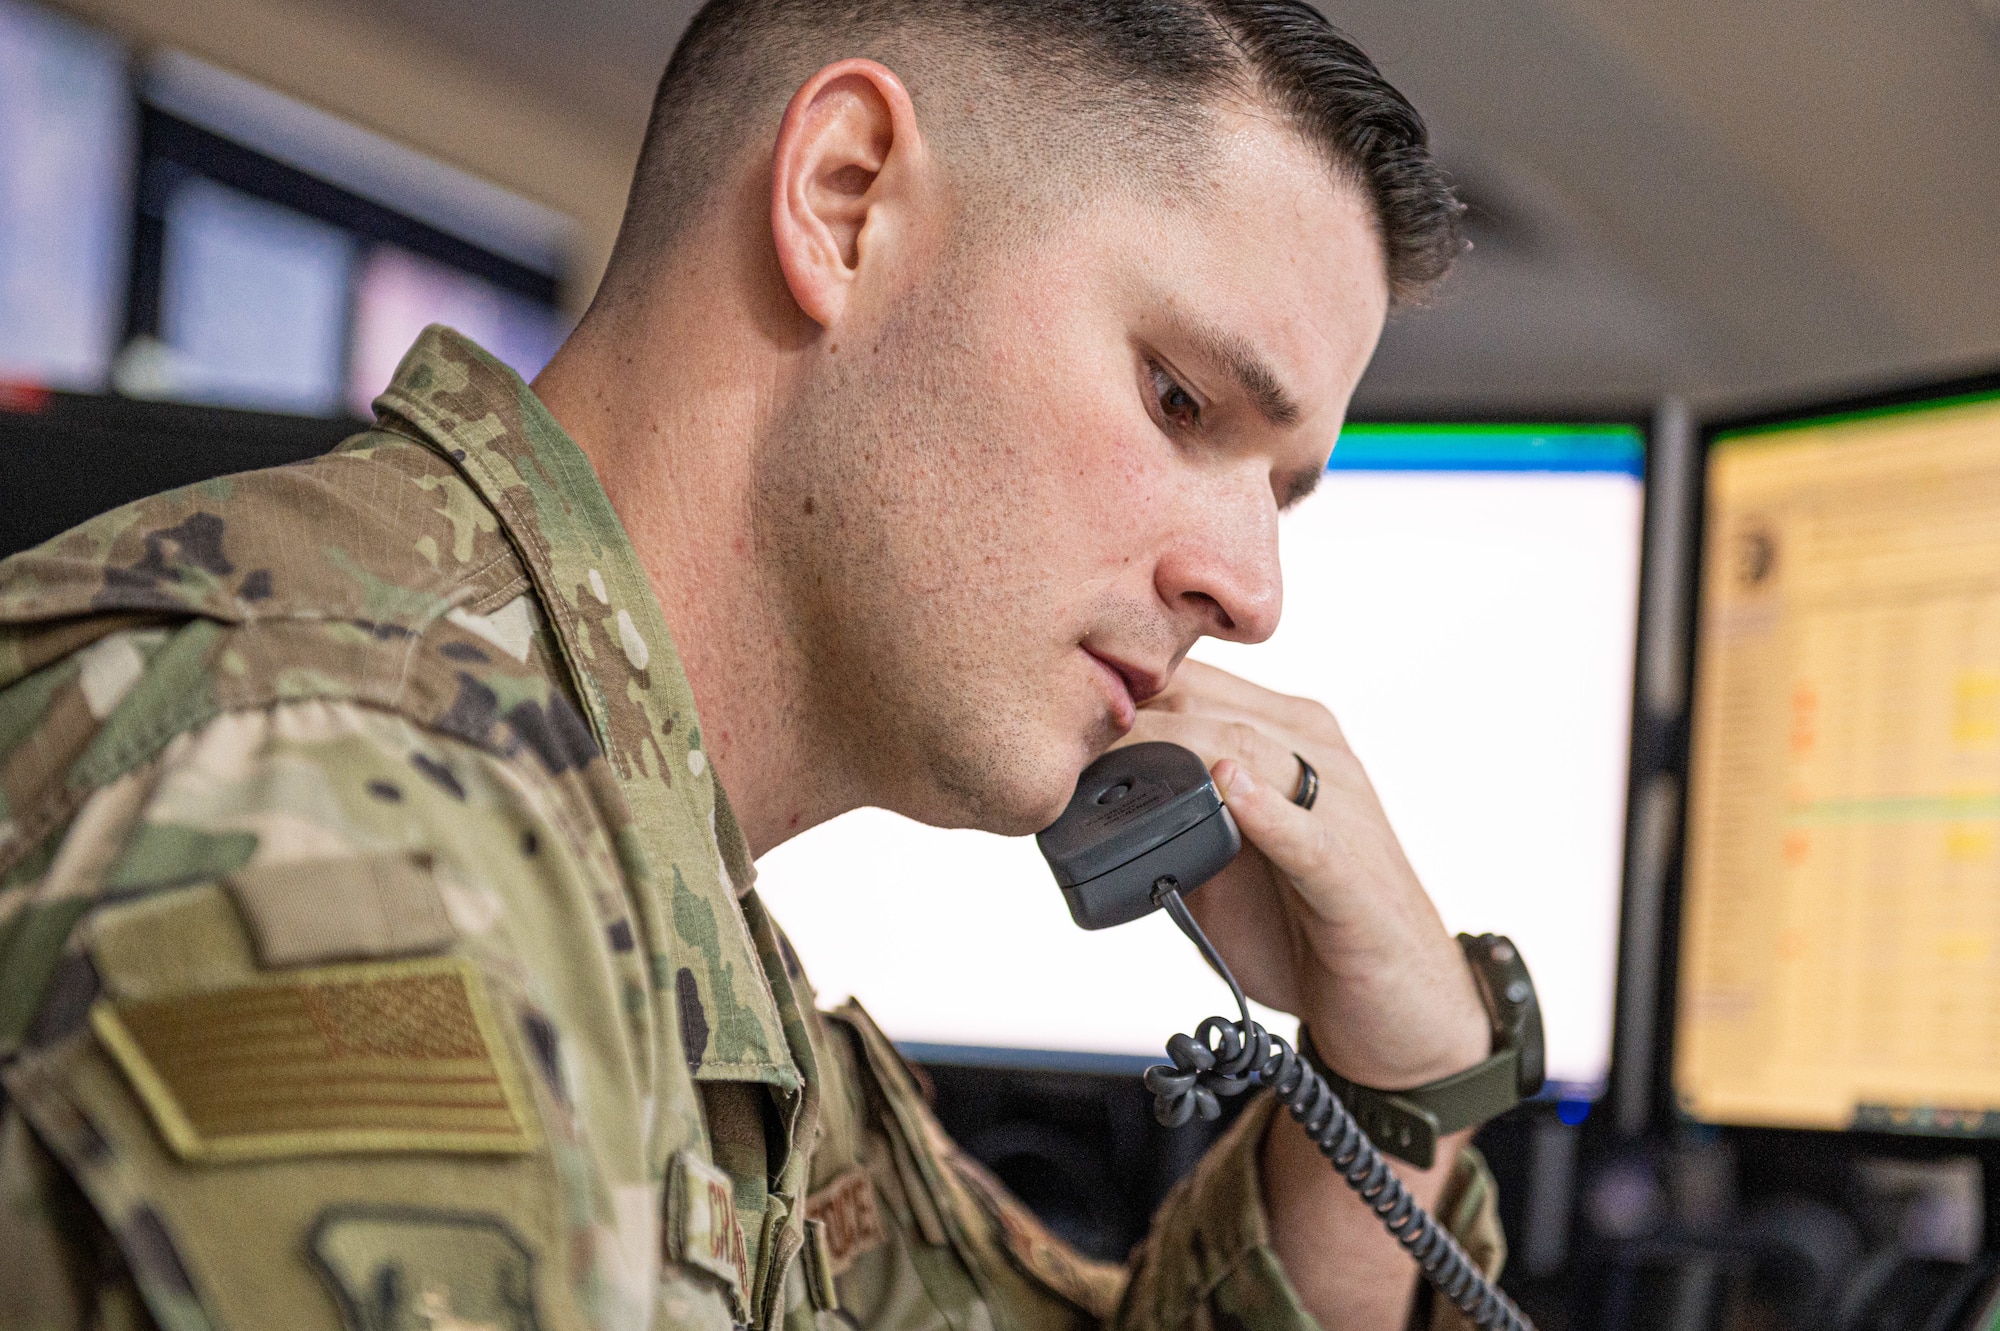 The base command and control operations center is the central command point for mission operations. It’s the job of airmen within to ensure operations and communications run efficiently and effectively no matter what.